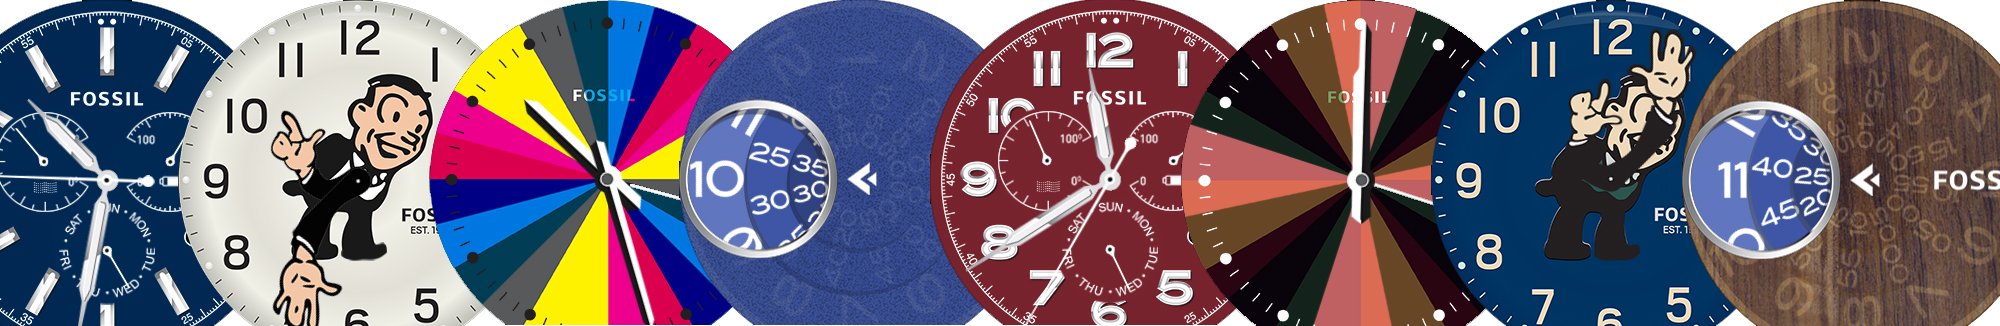 Fossil Q Founder watch faces